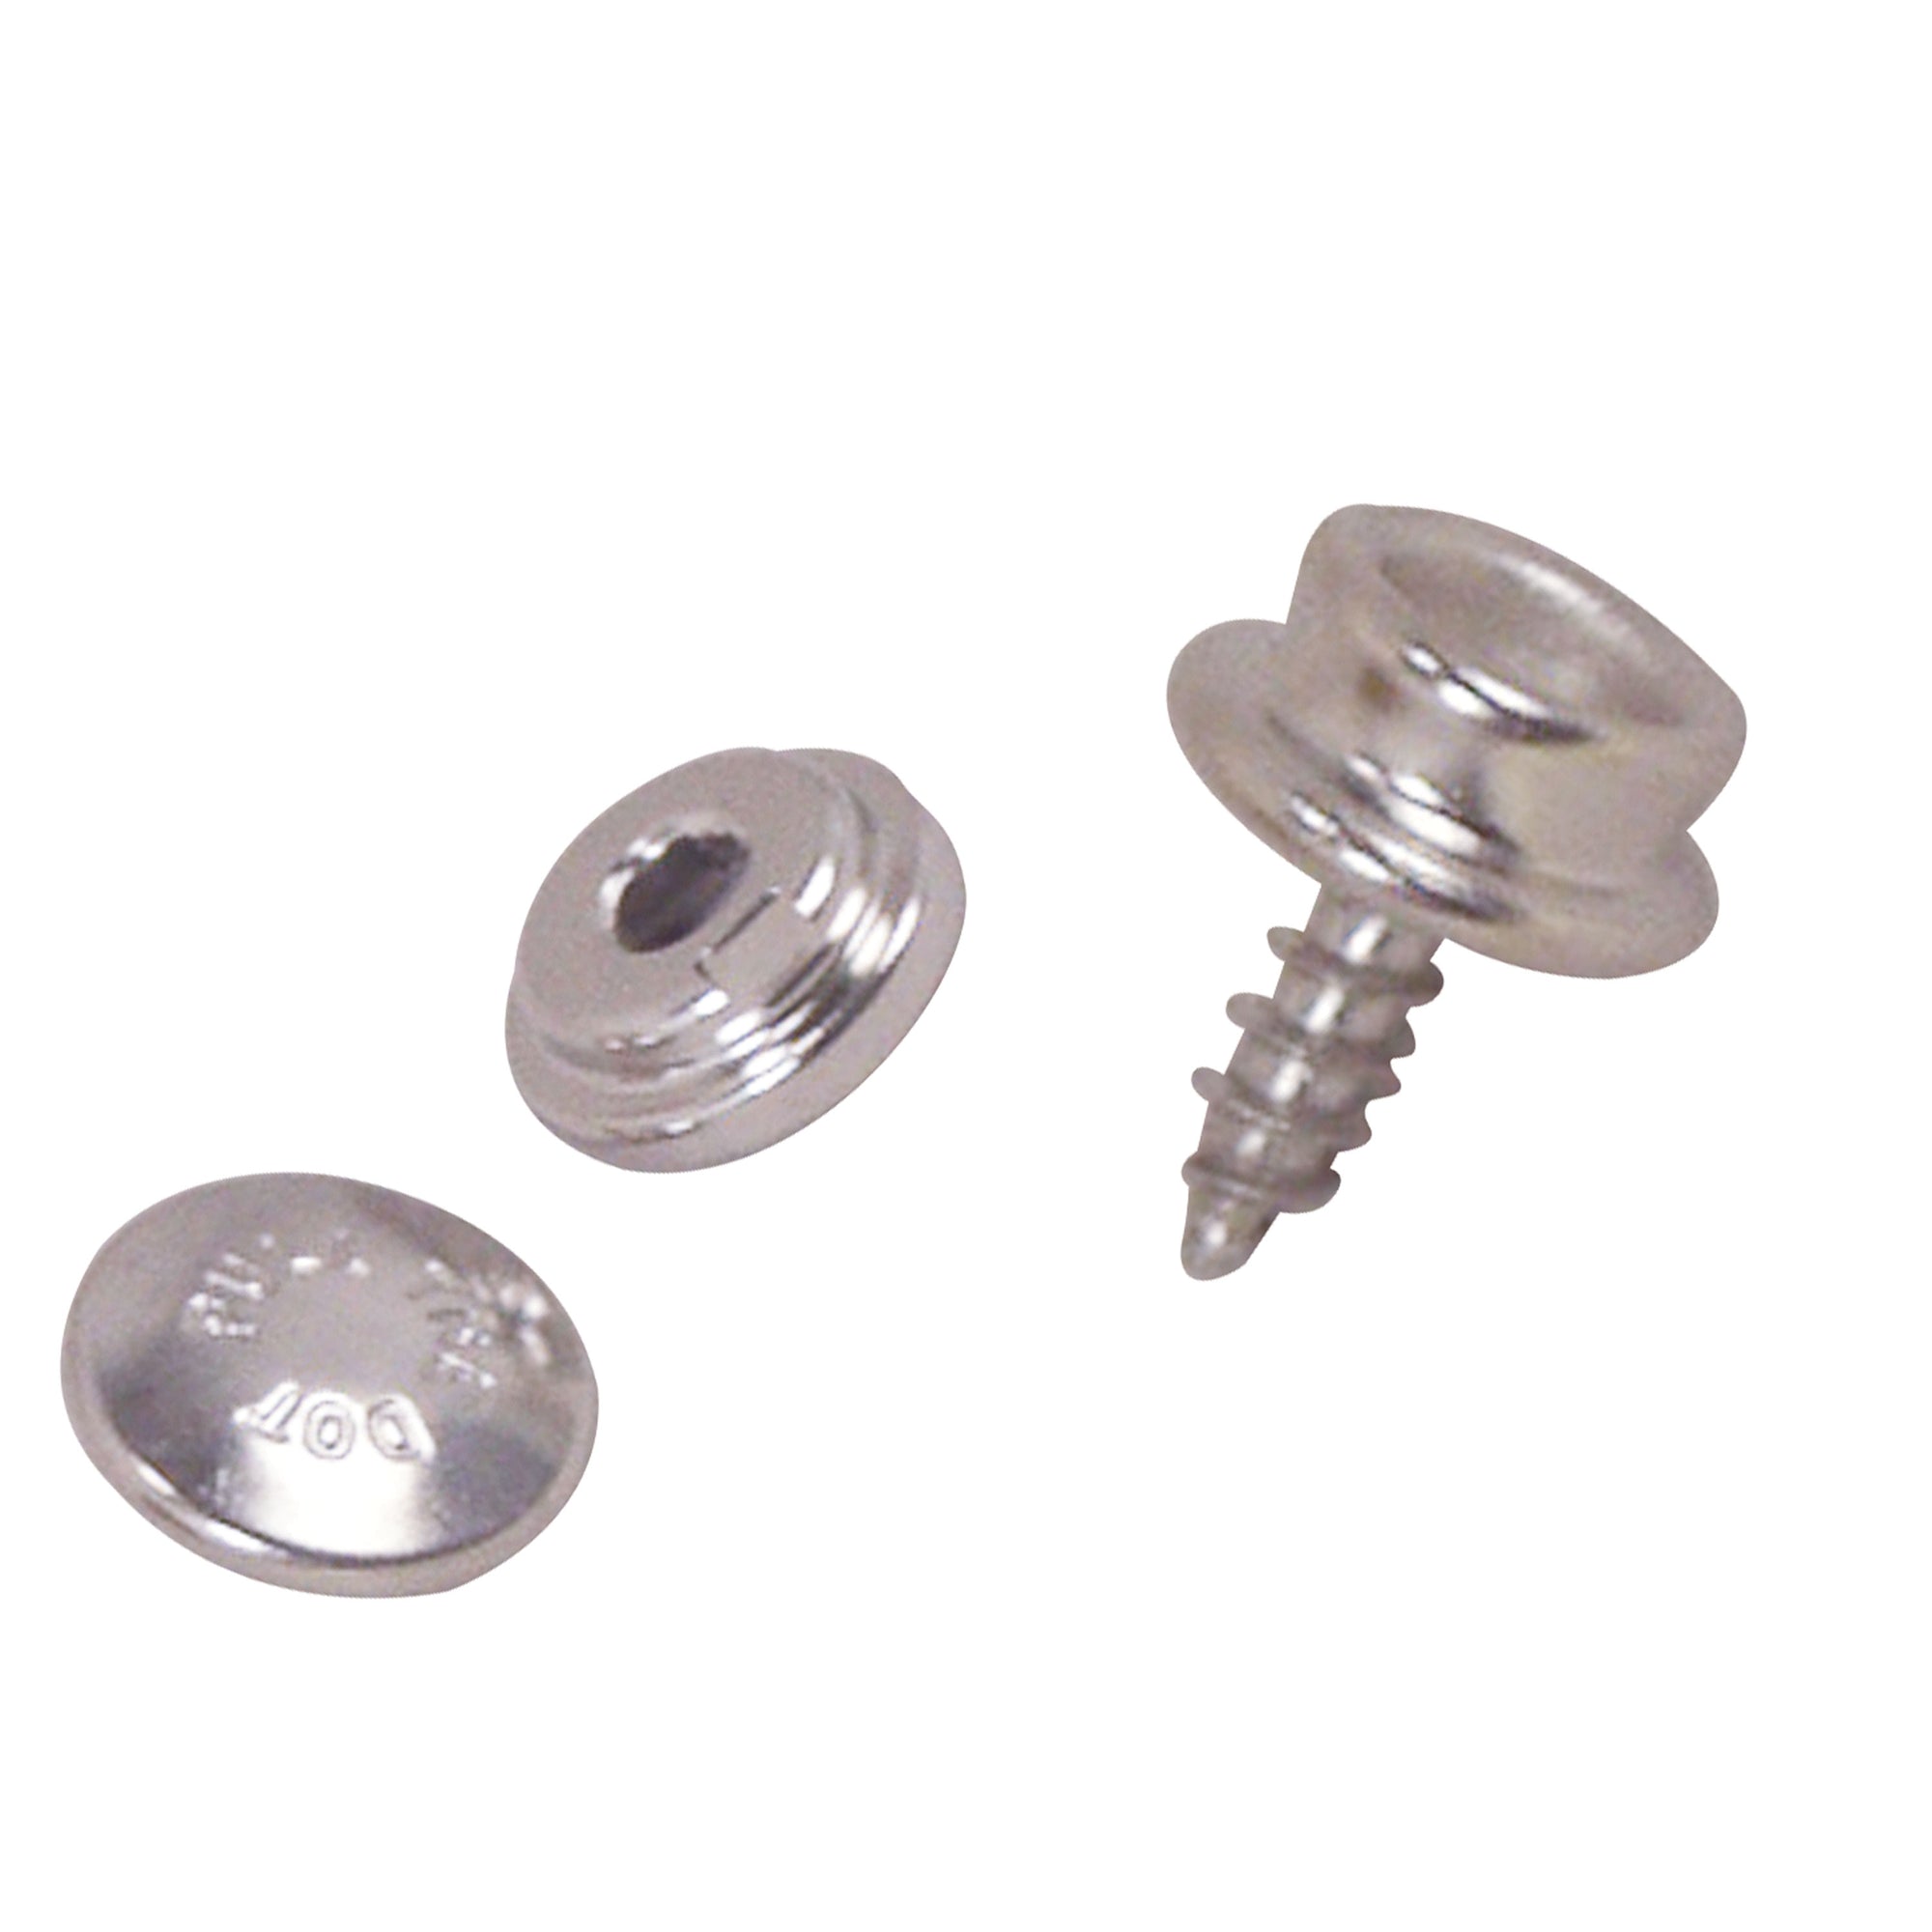 Taylor Made 16402 "One-Way" Snaps on Wood Screw - Male, Pack of 4